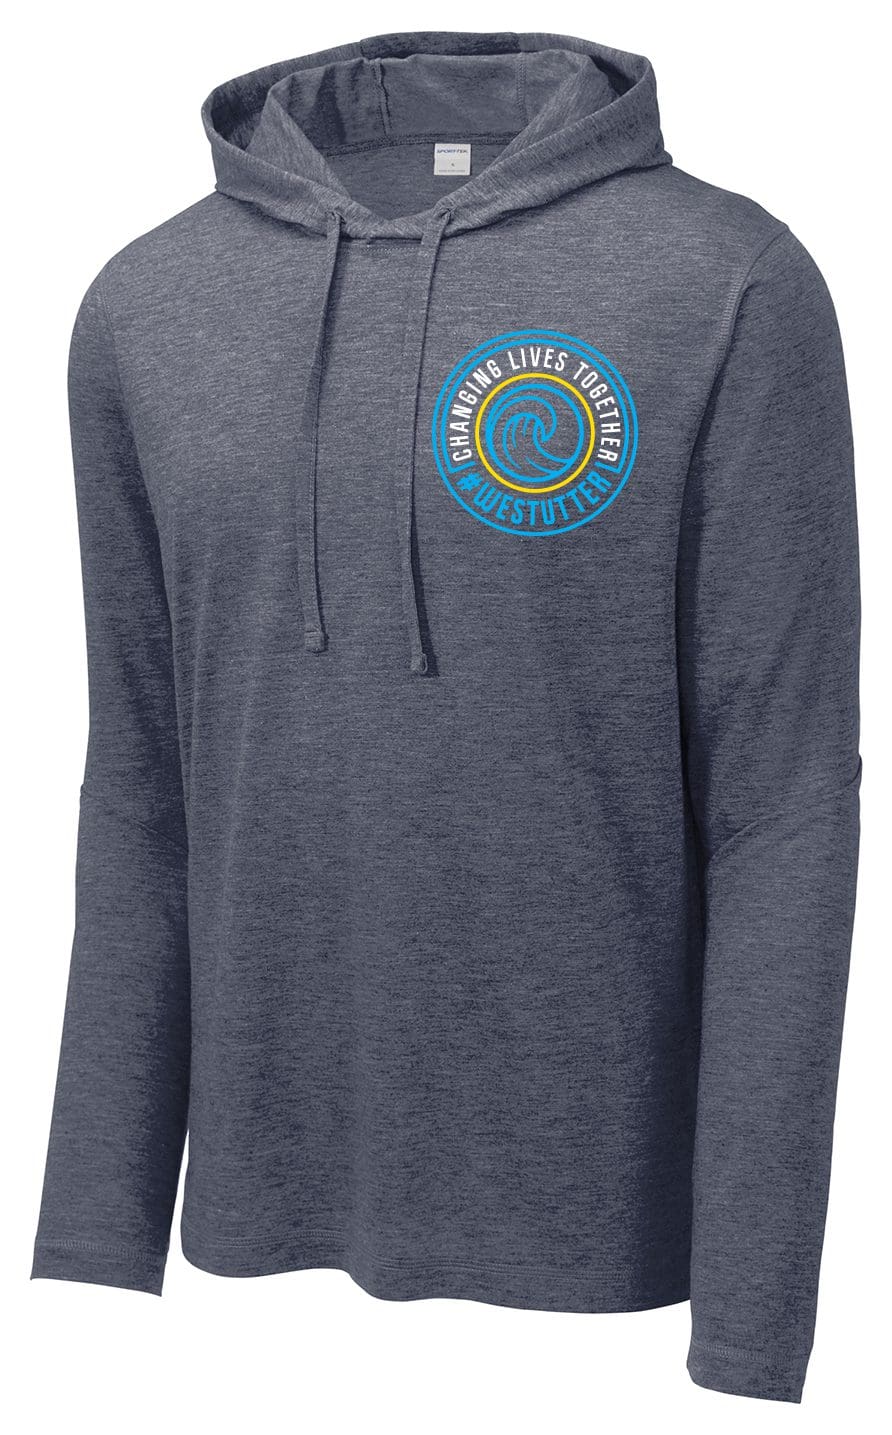 A heather gray Newport Beach Short Sleeved T-Shirt with a drawstring hood and a blue logo on the chest that reads "oceanic lives together" within a circular design.